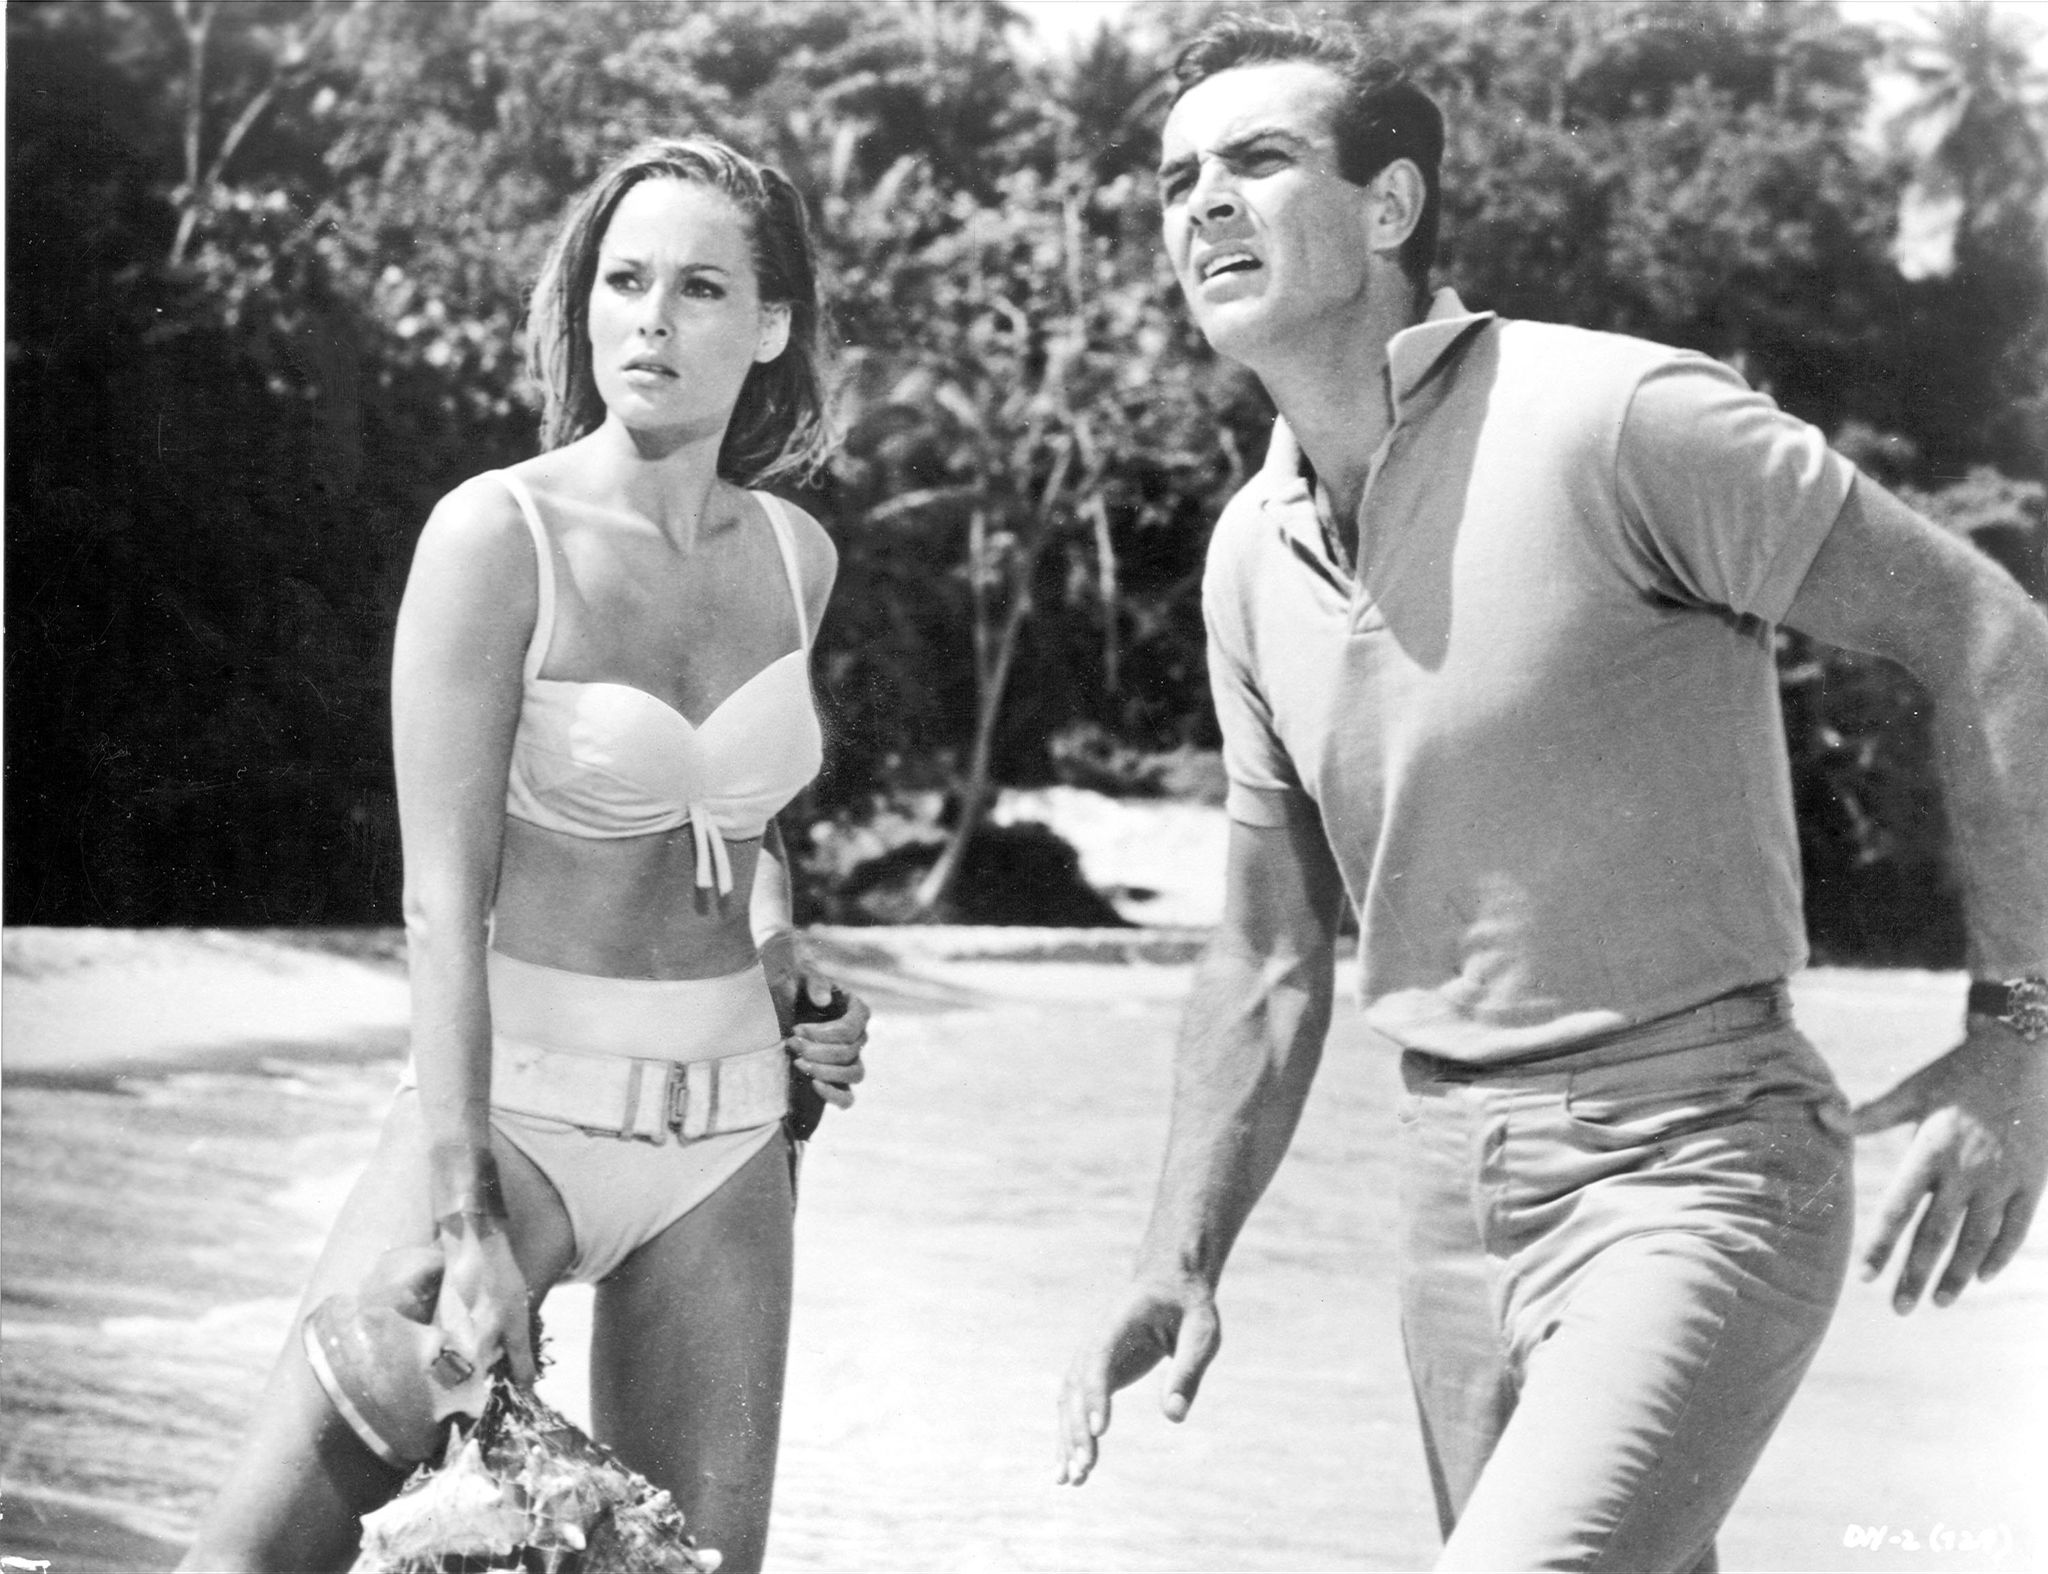 1963  actors ursula andress and sean connery in a scene from dr no directed by terence young  photo by michael ochs archivesgetty images